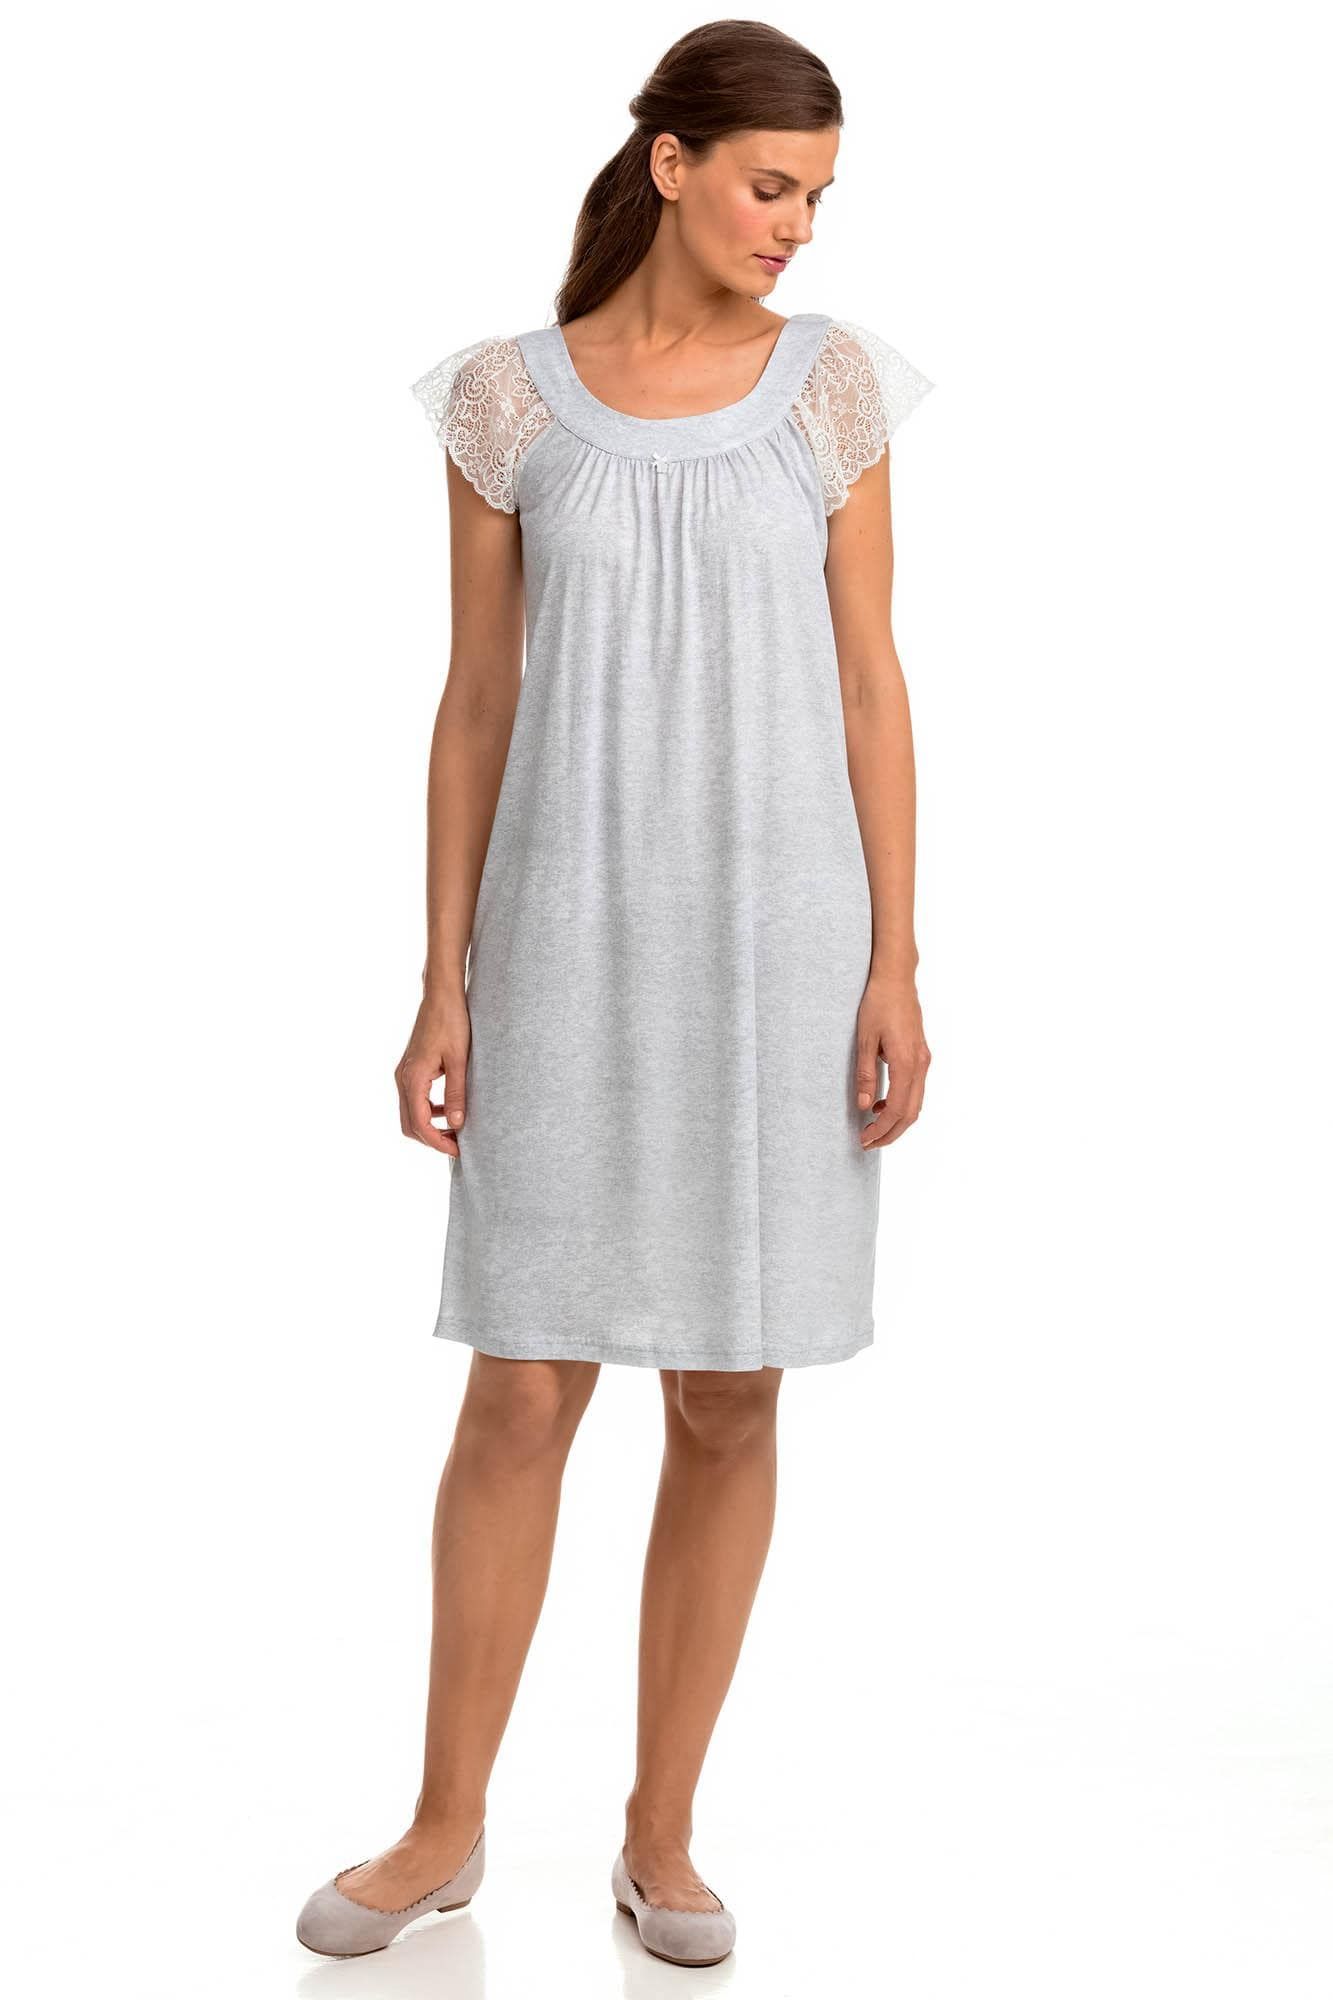 Sleeveless Nightgown with Lace Details